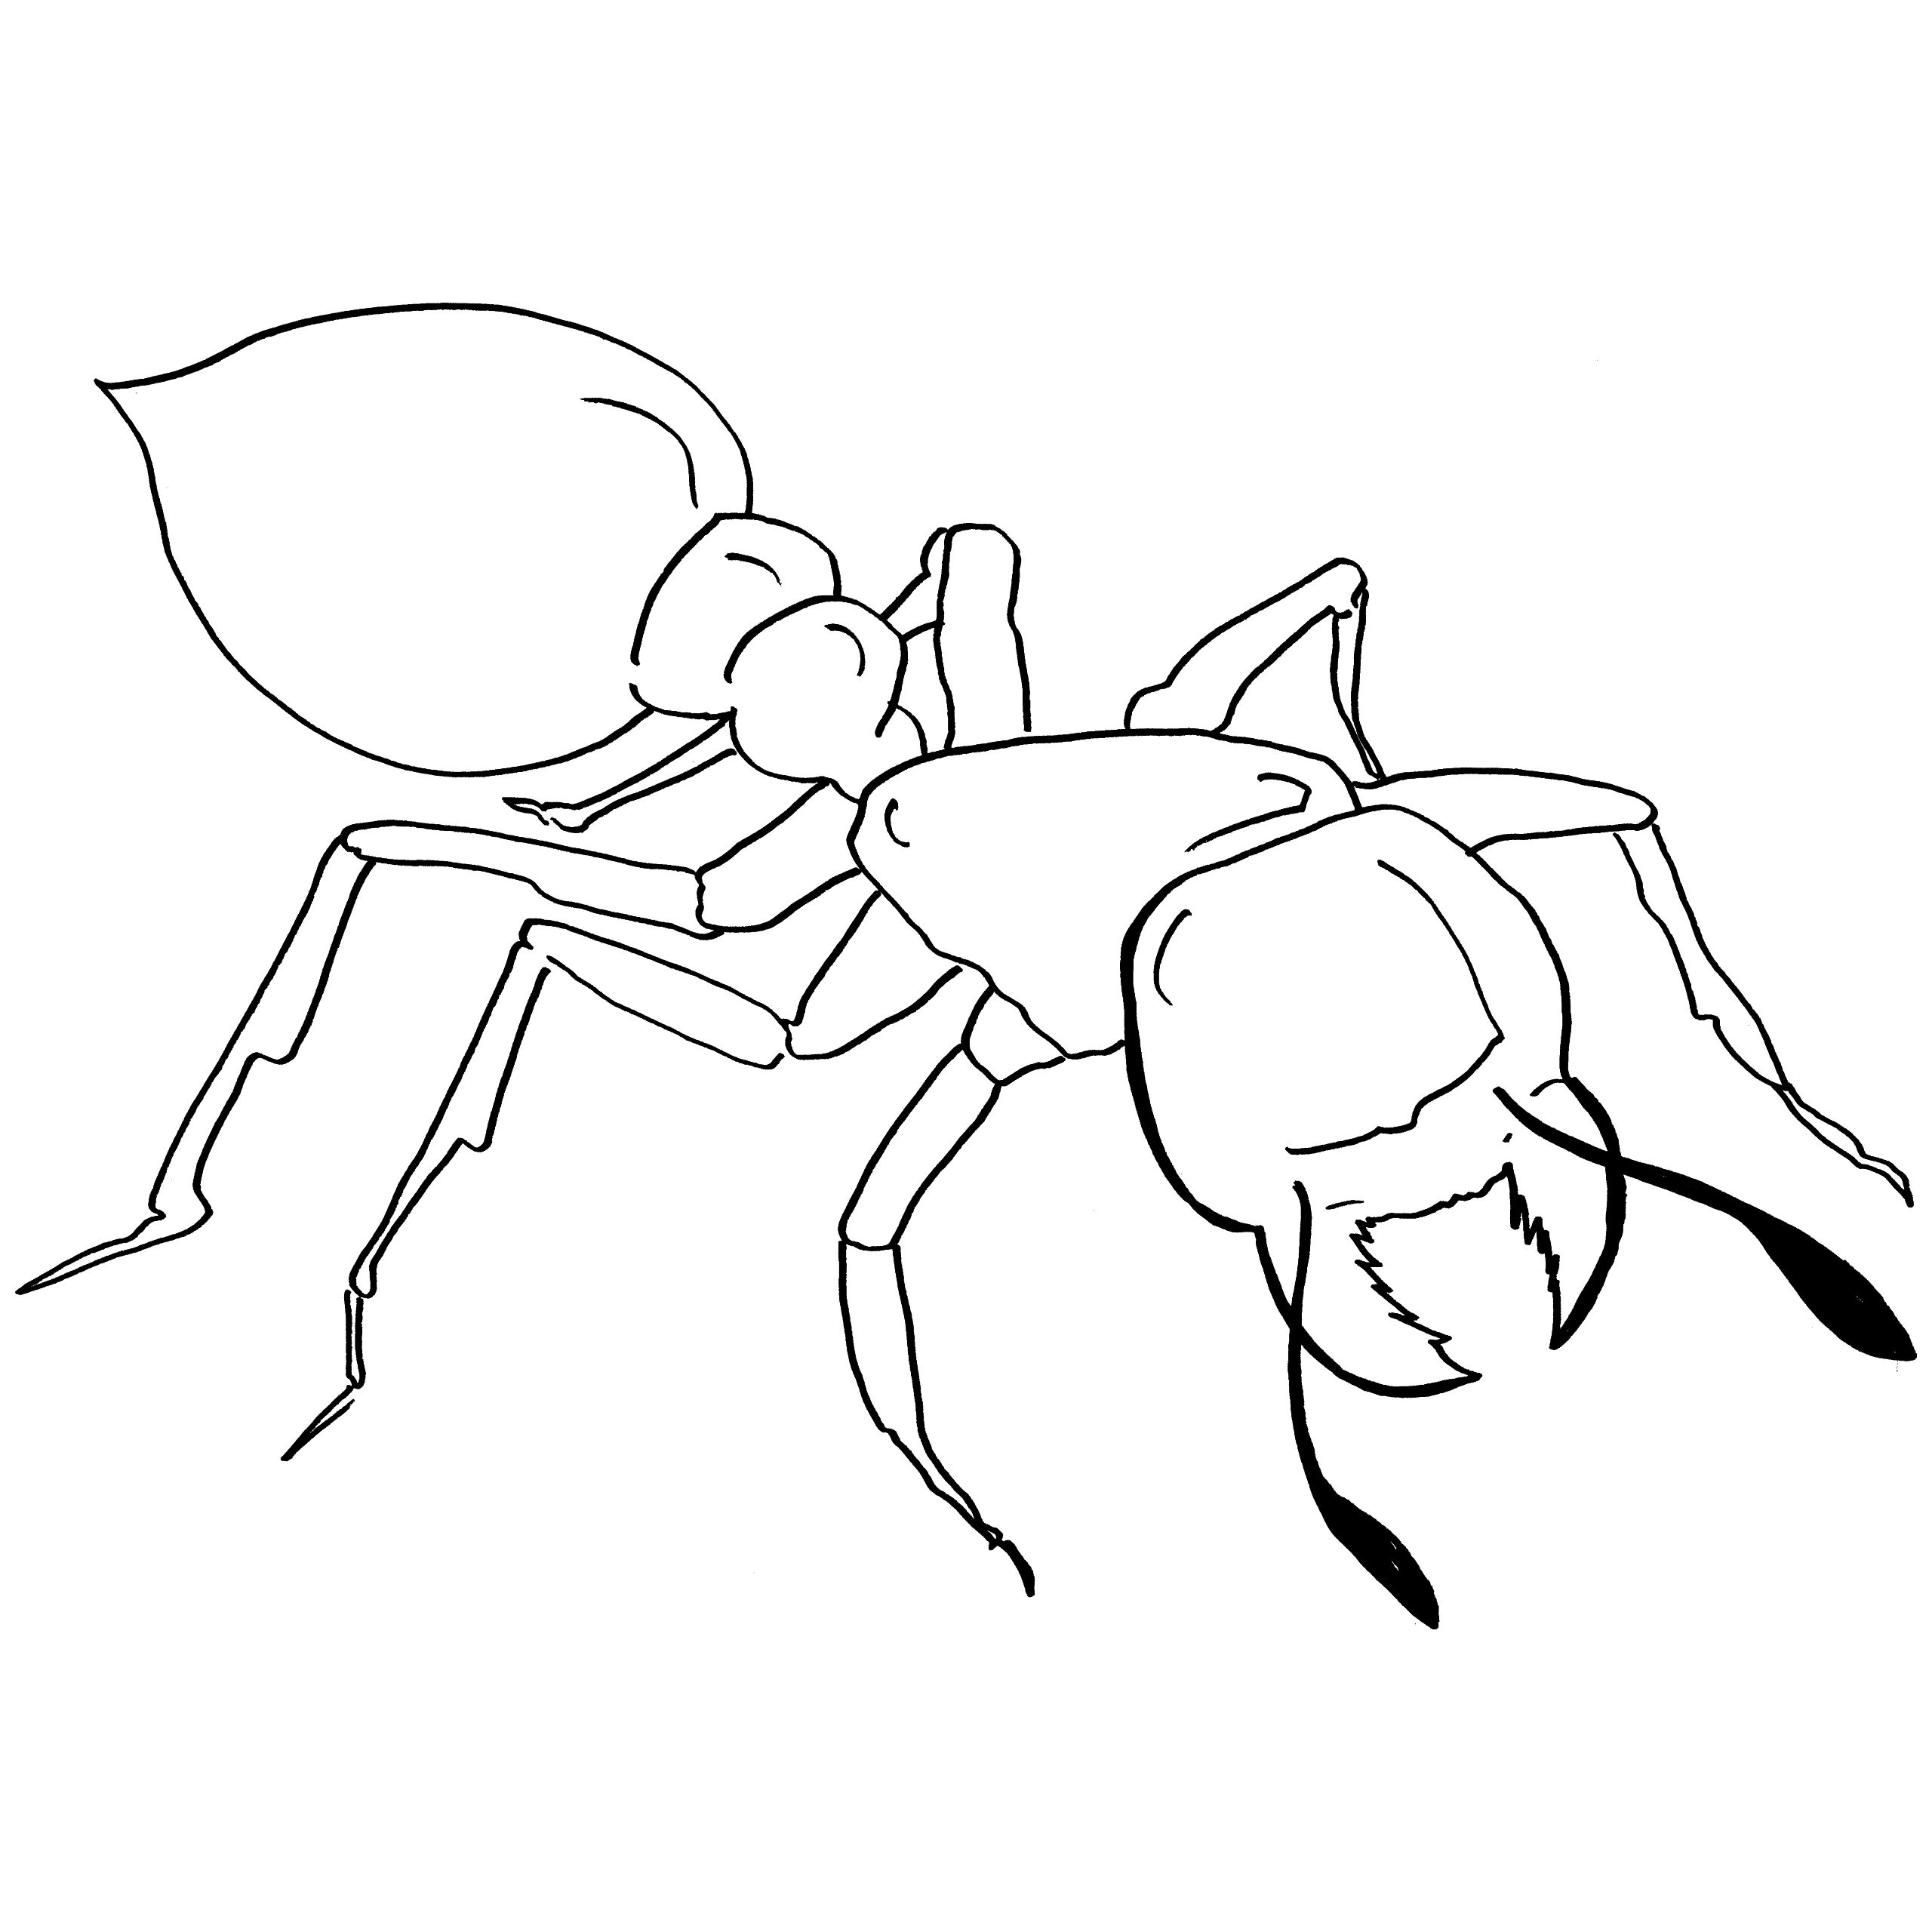 Line drawing at getdrawings. Ants clipart bullet ant